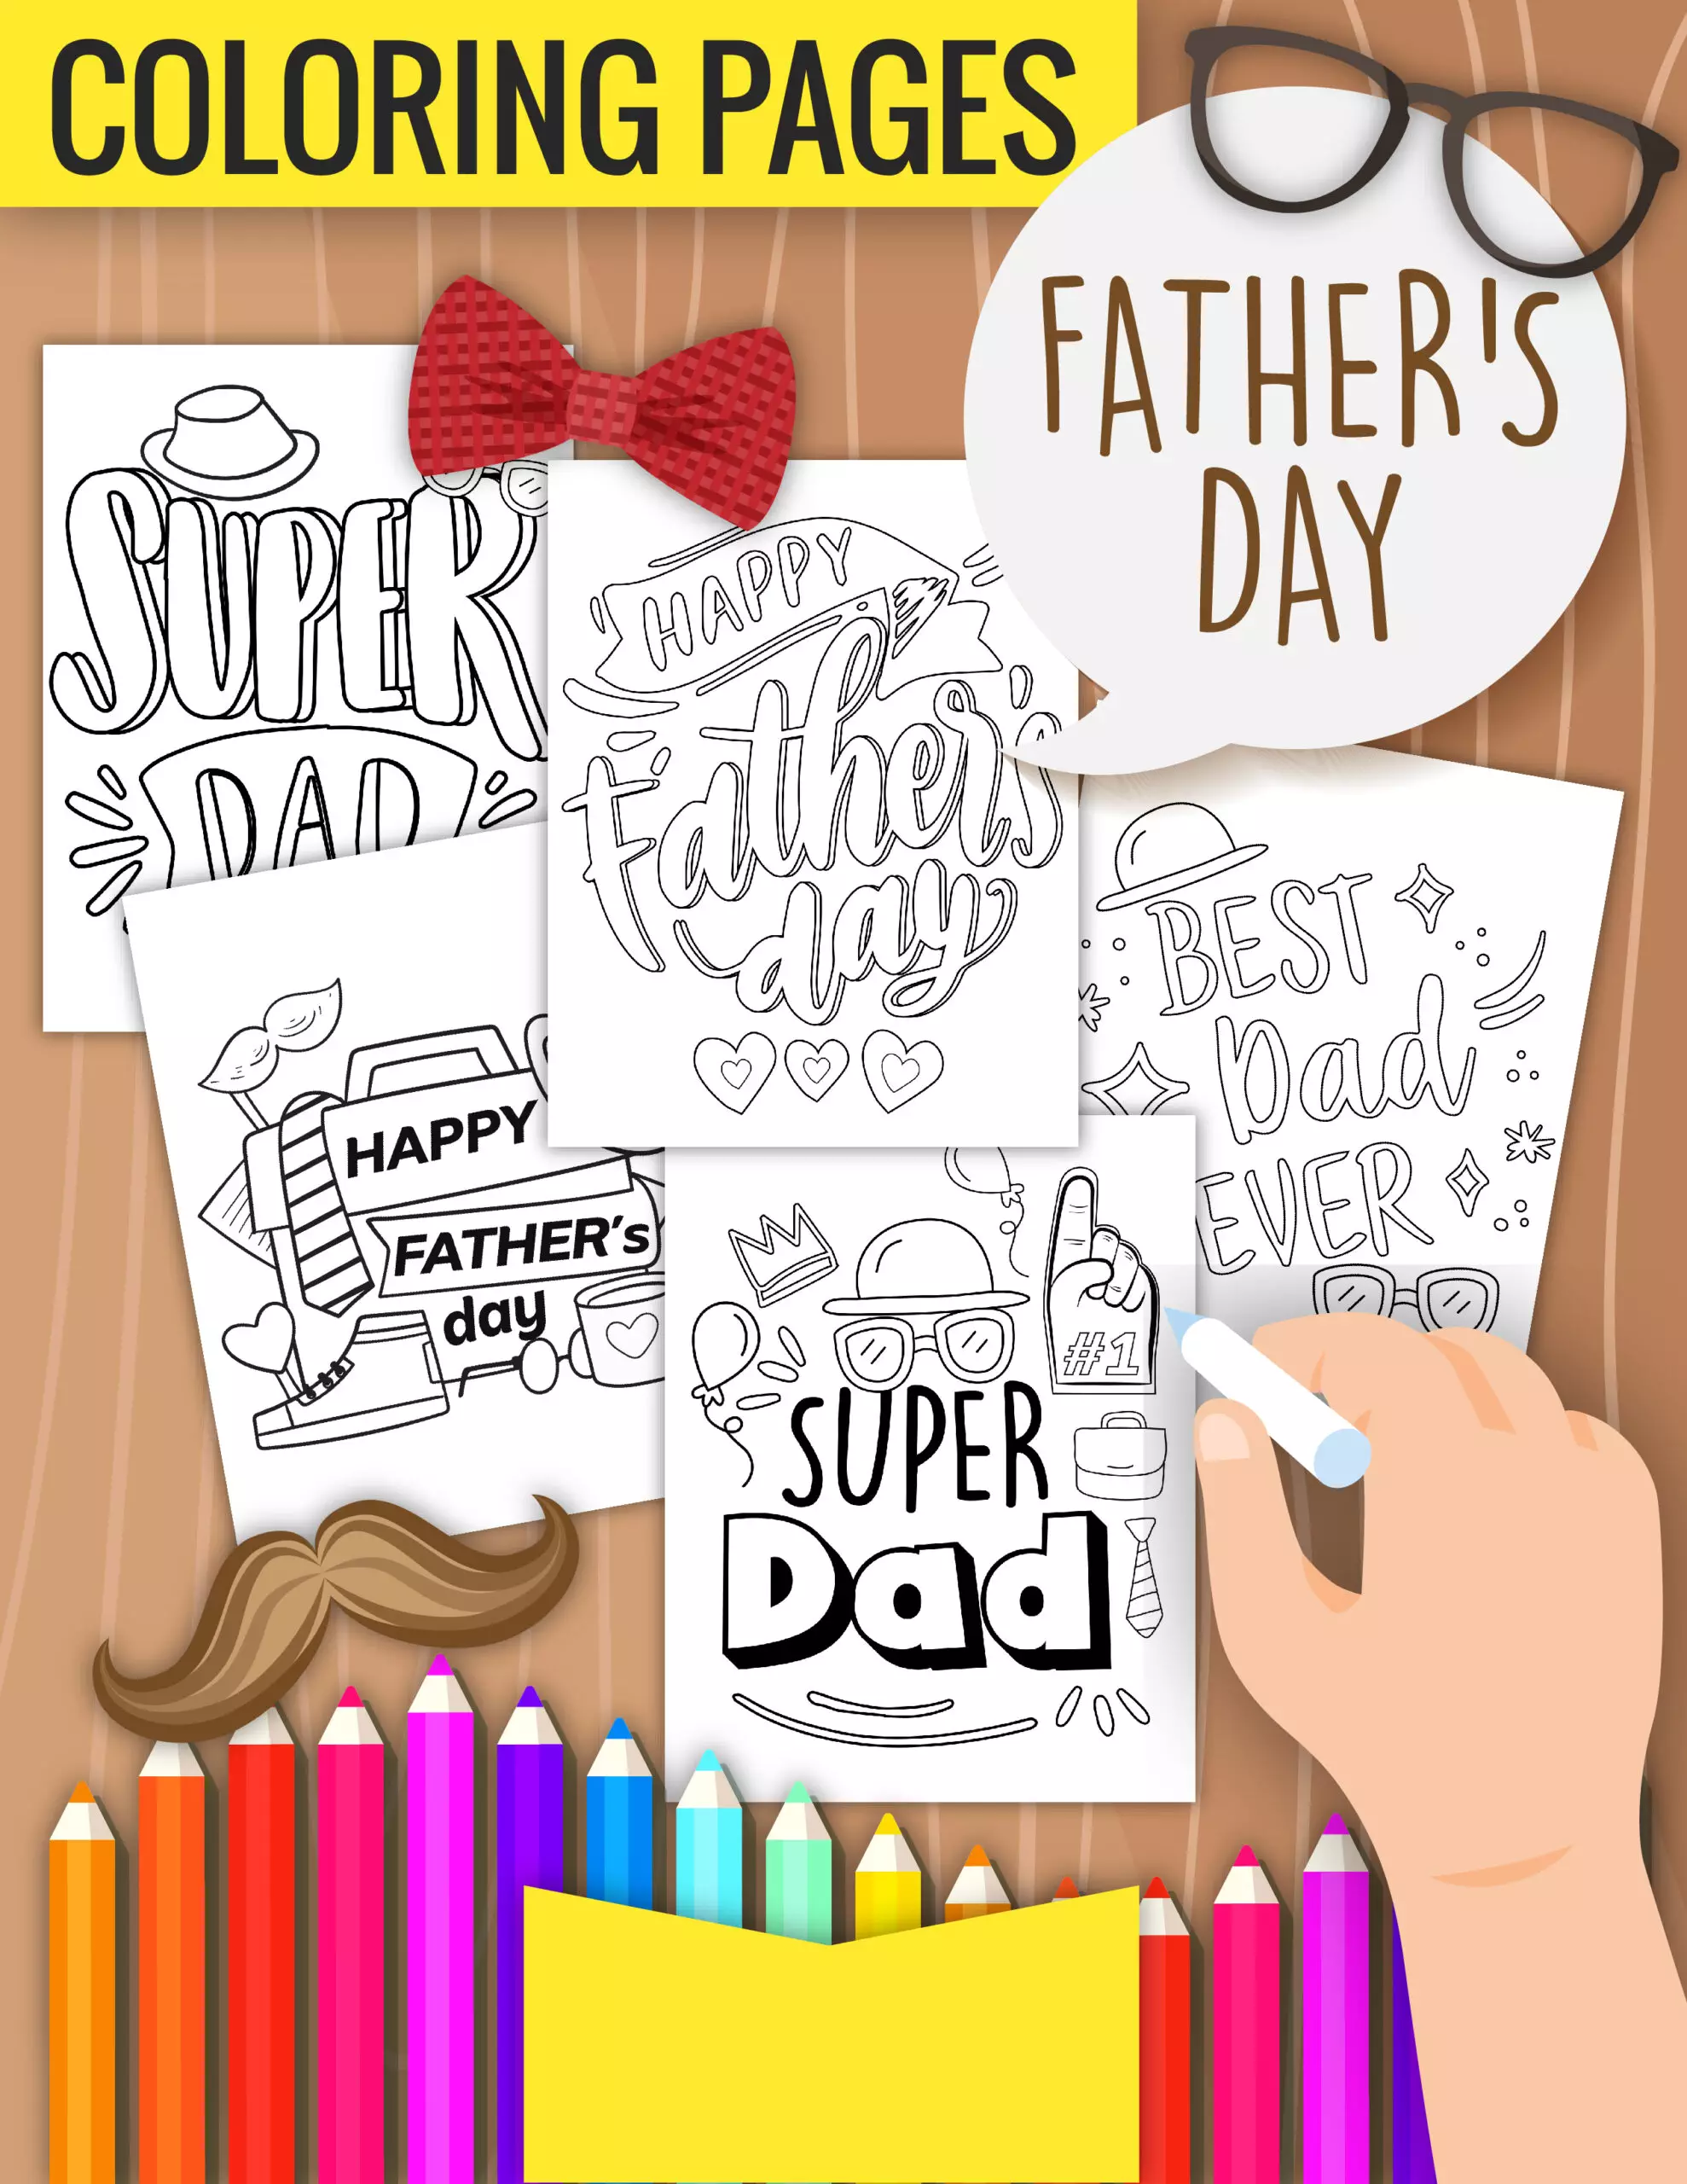 father's day coloring pages pin image